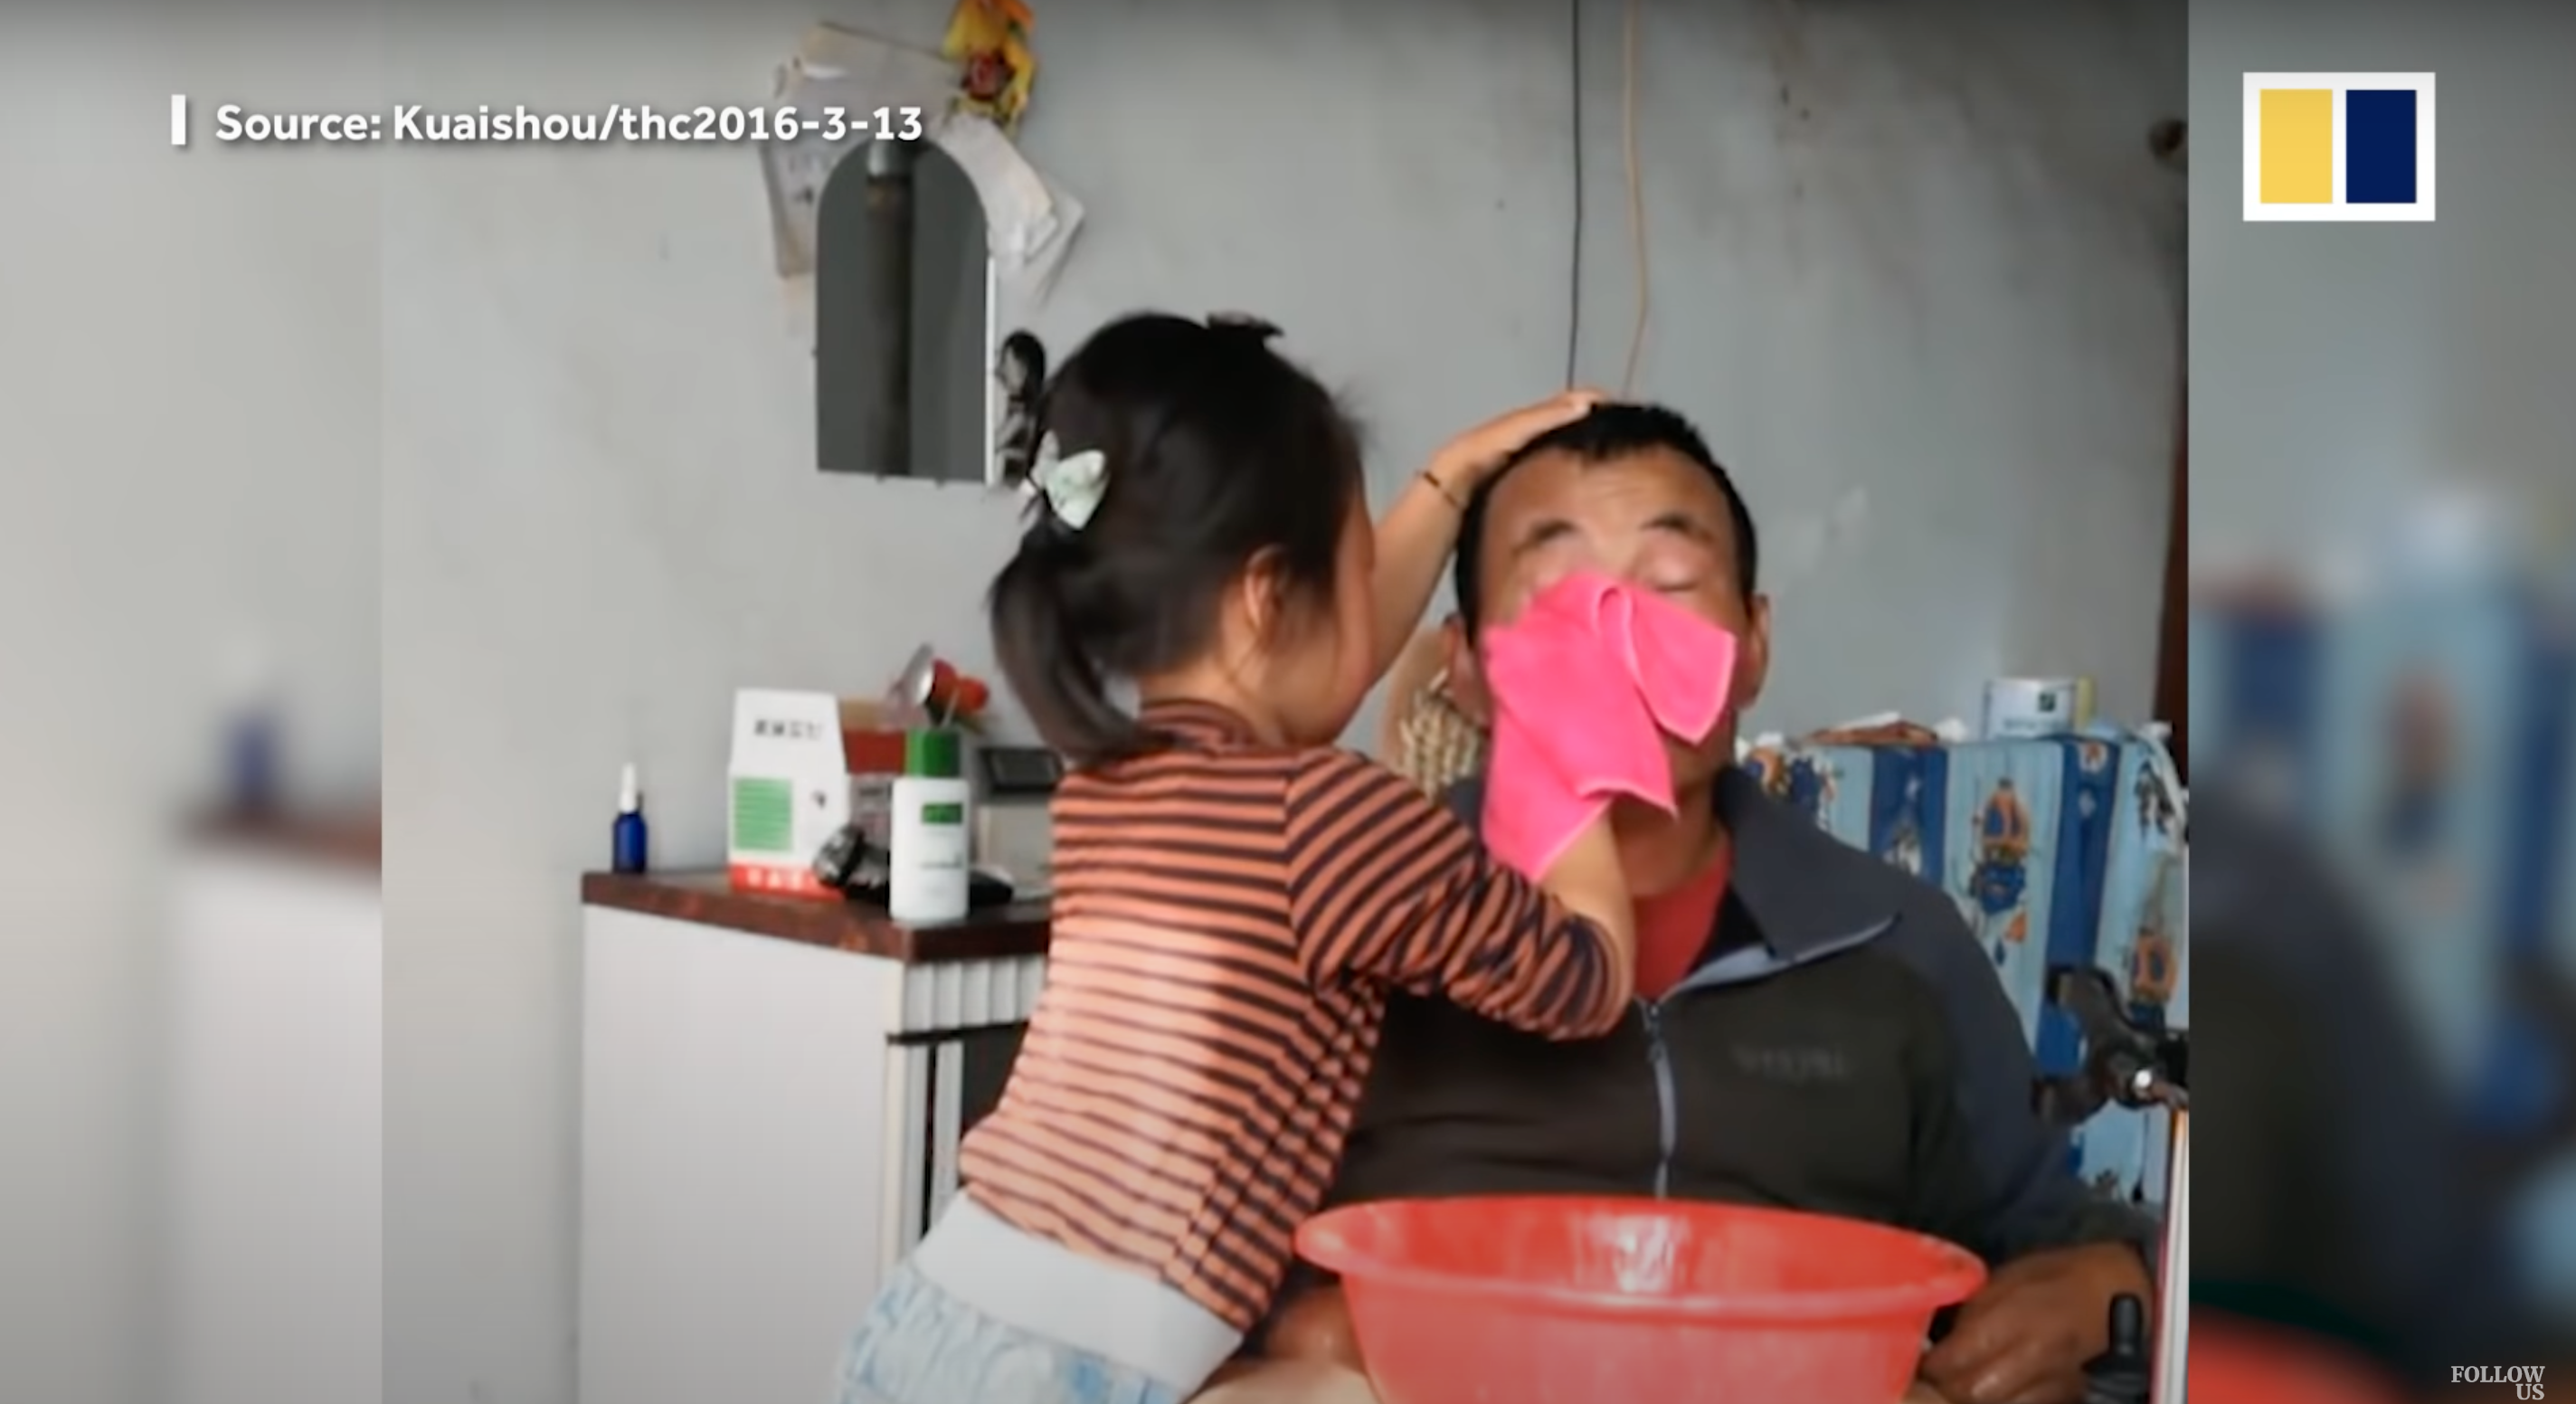 Jia Jia washes Tian's face. | Source: YouTube.com/South China Morning Post